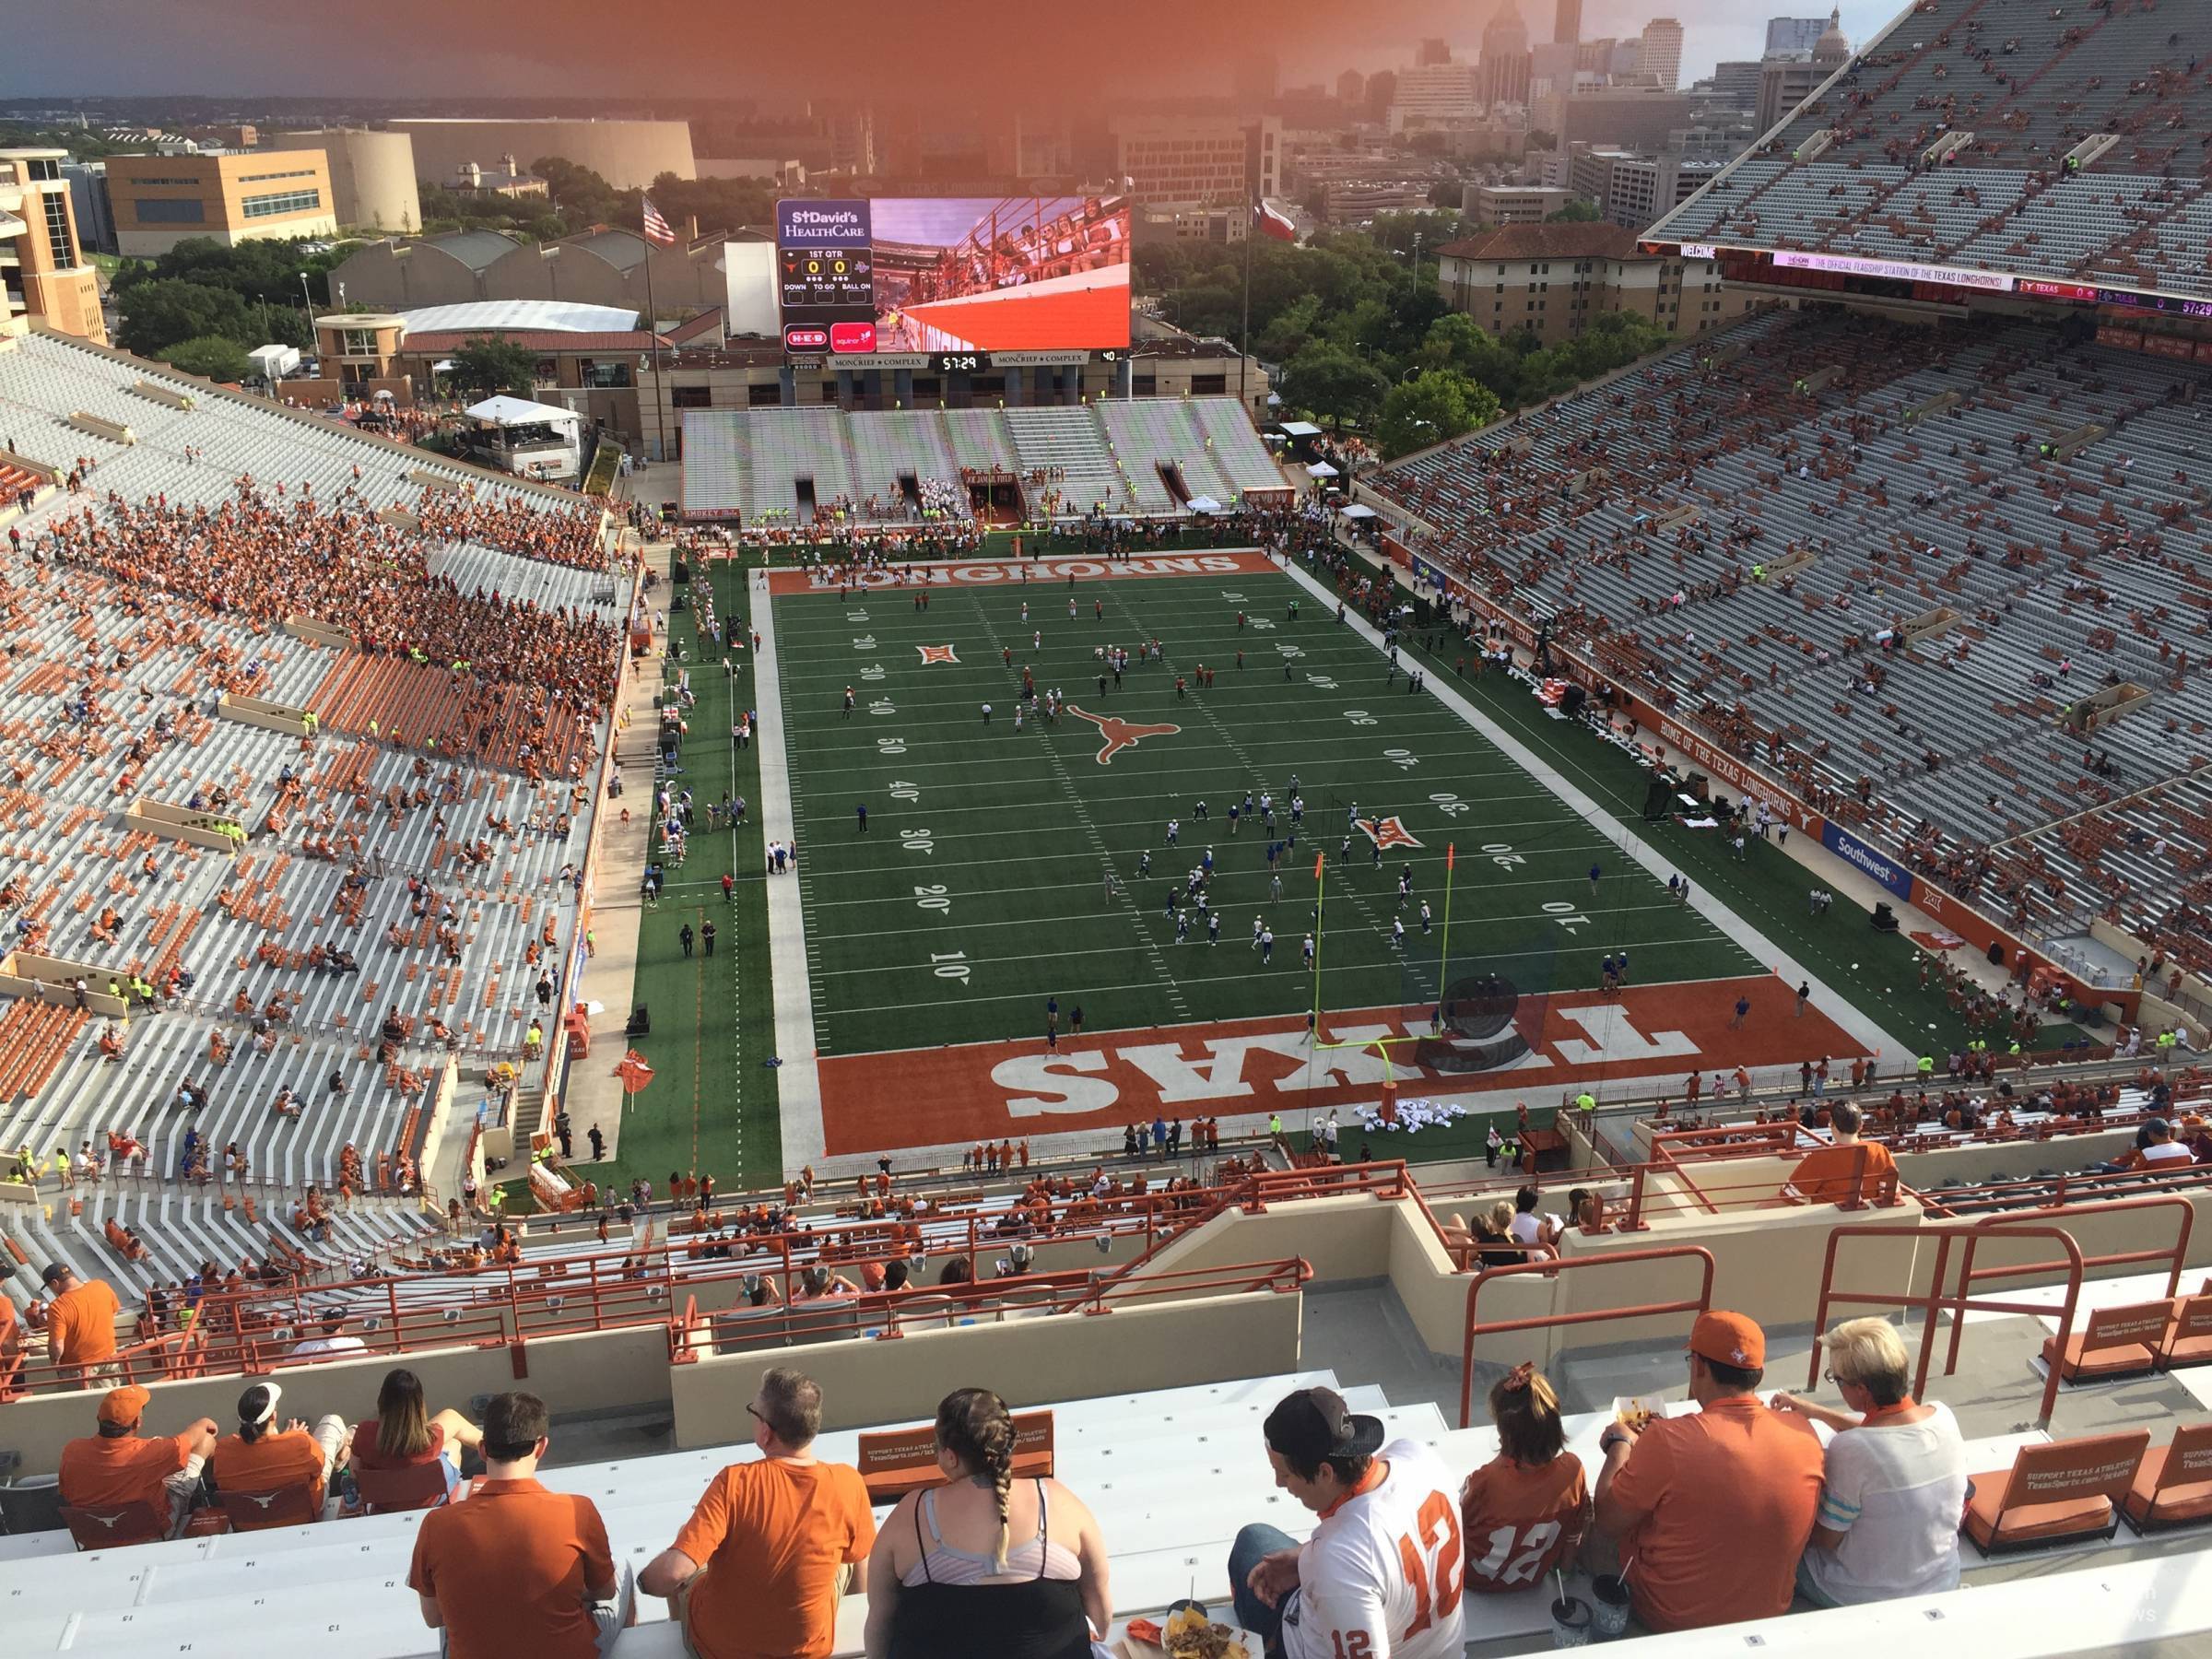 section 116, row 20 seat view  - dkr-texas memorial stadium